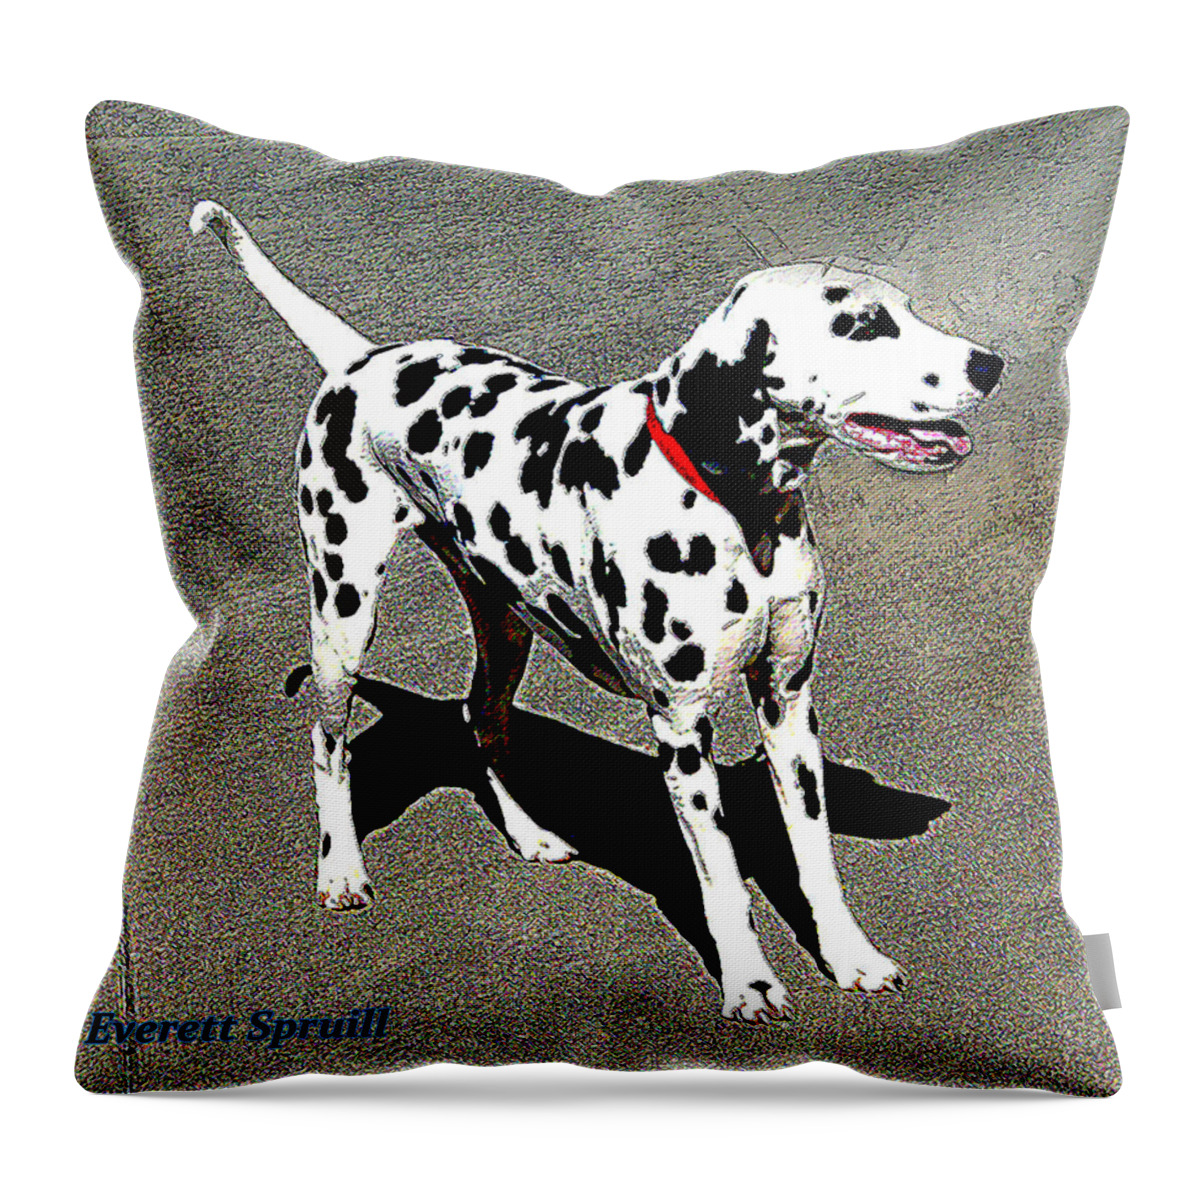 Everett Spruill Throw Pillow featuring the photograph Dalmation by Everett Spruill